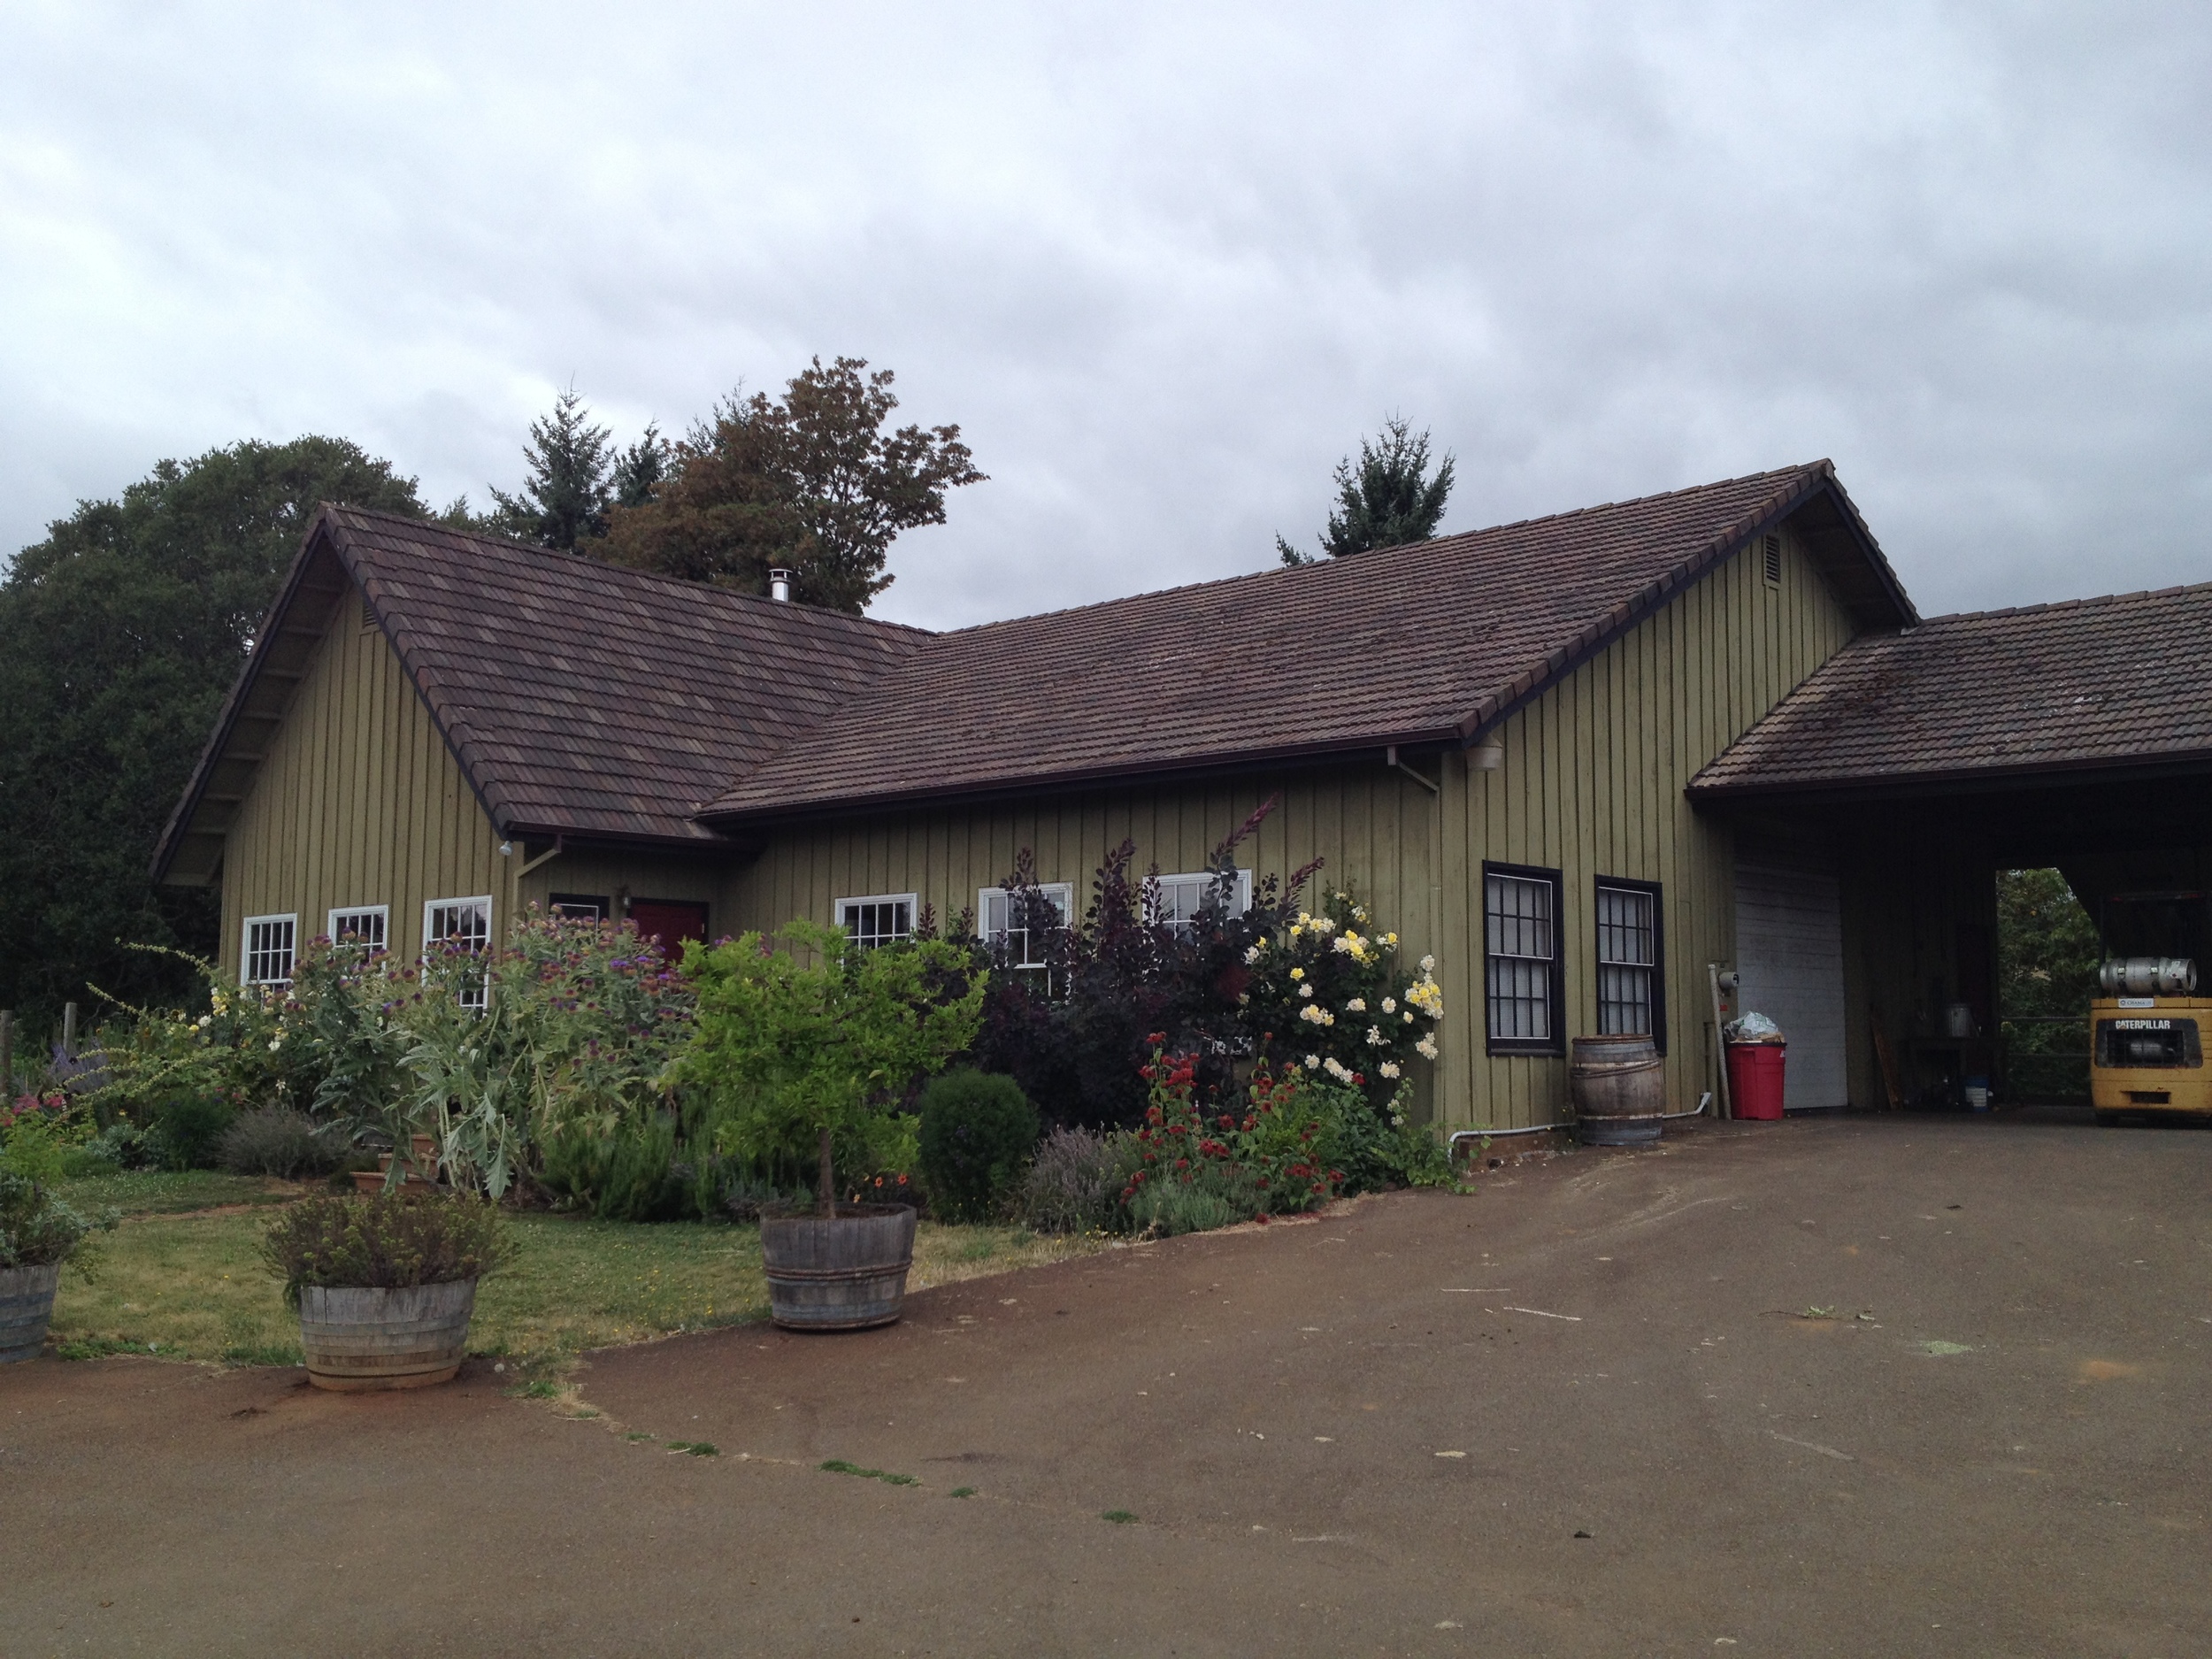  The elusive Cameron Winery in the Dundee Hills.  